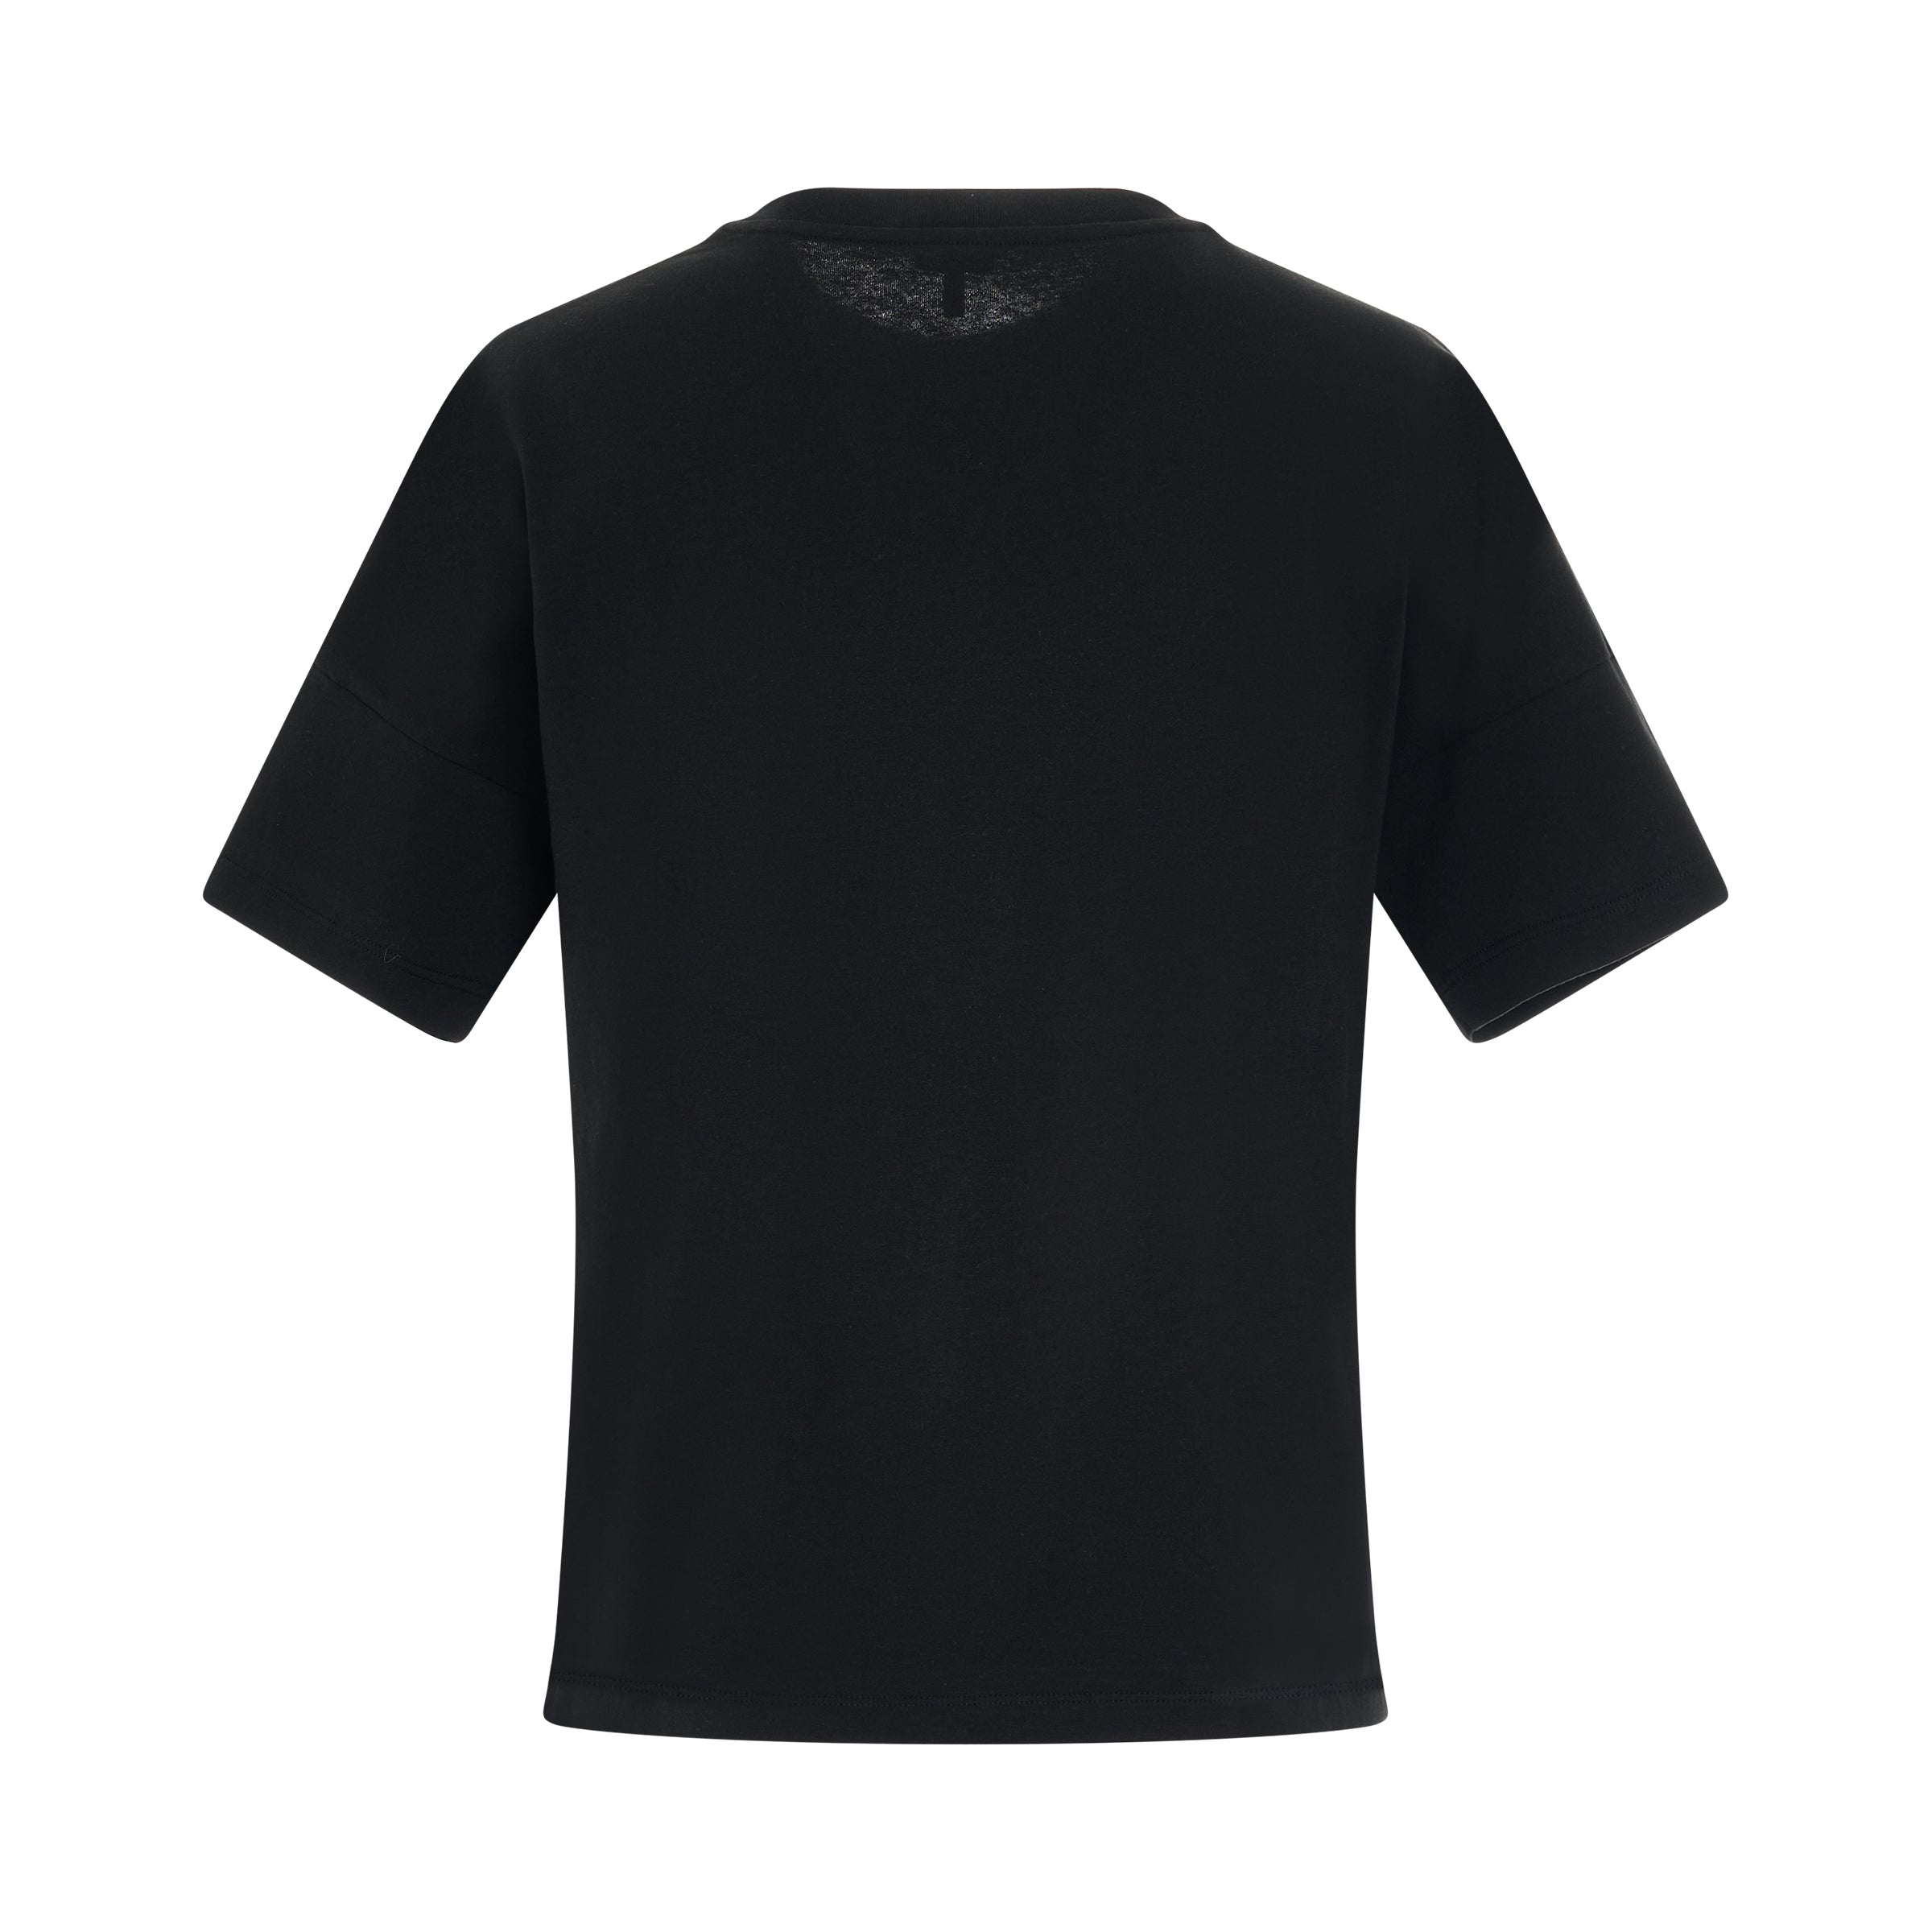 Anagram Boxy Fit T-Shirt in Black - 4